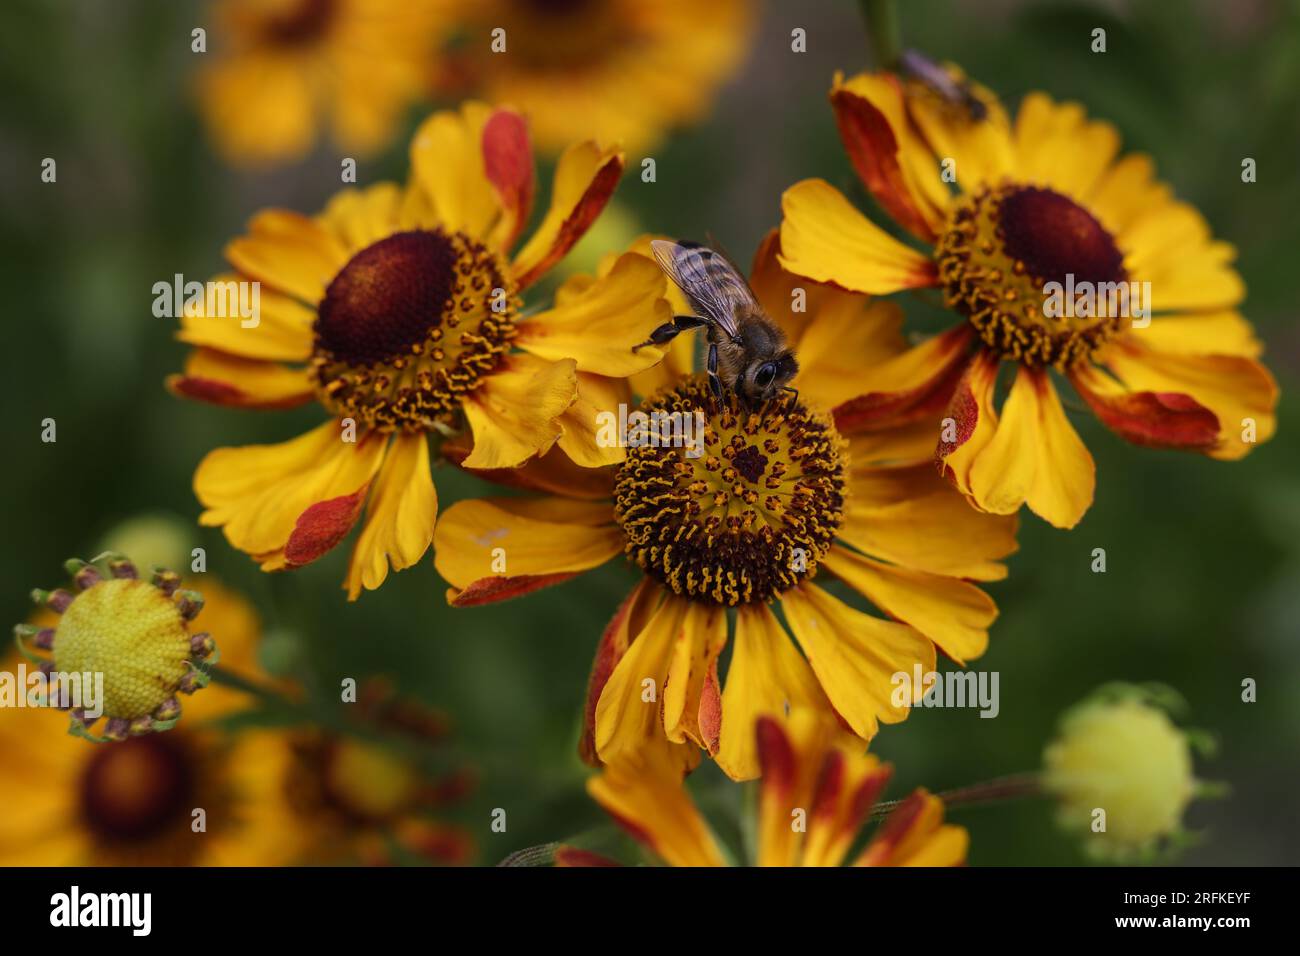 a honey bee on a common sneezeweed flowers in the summer garden Stock Photo